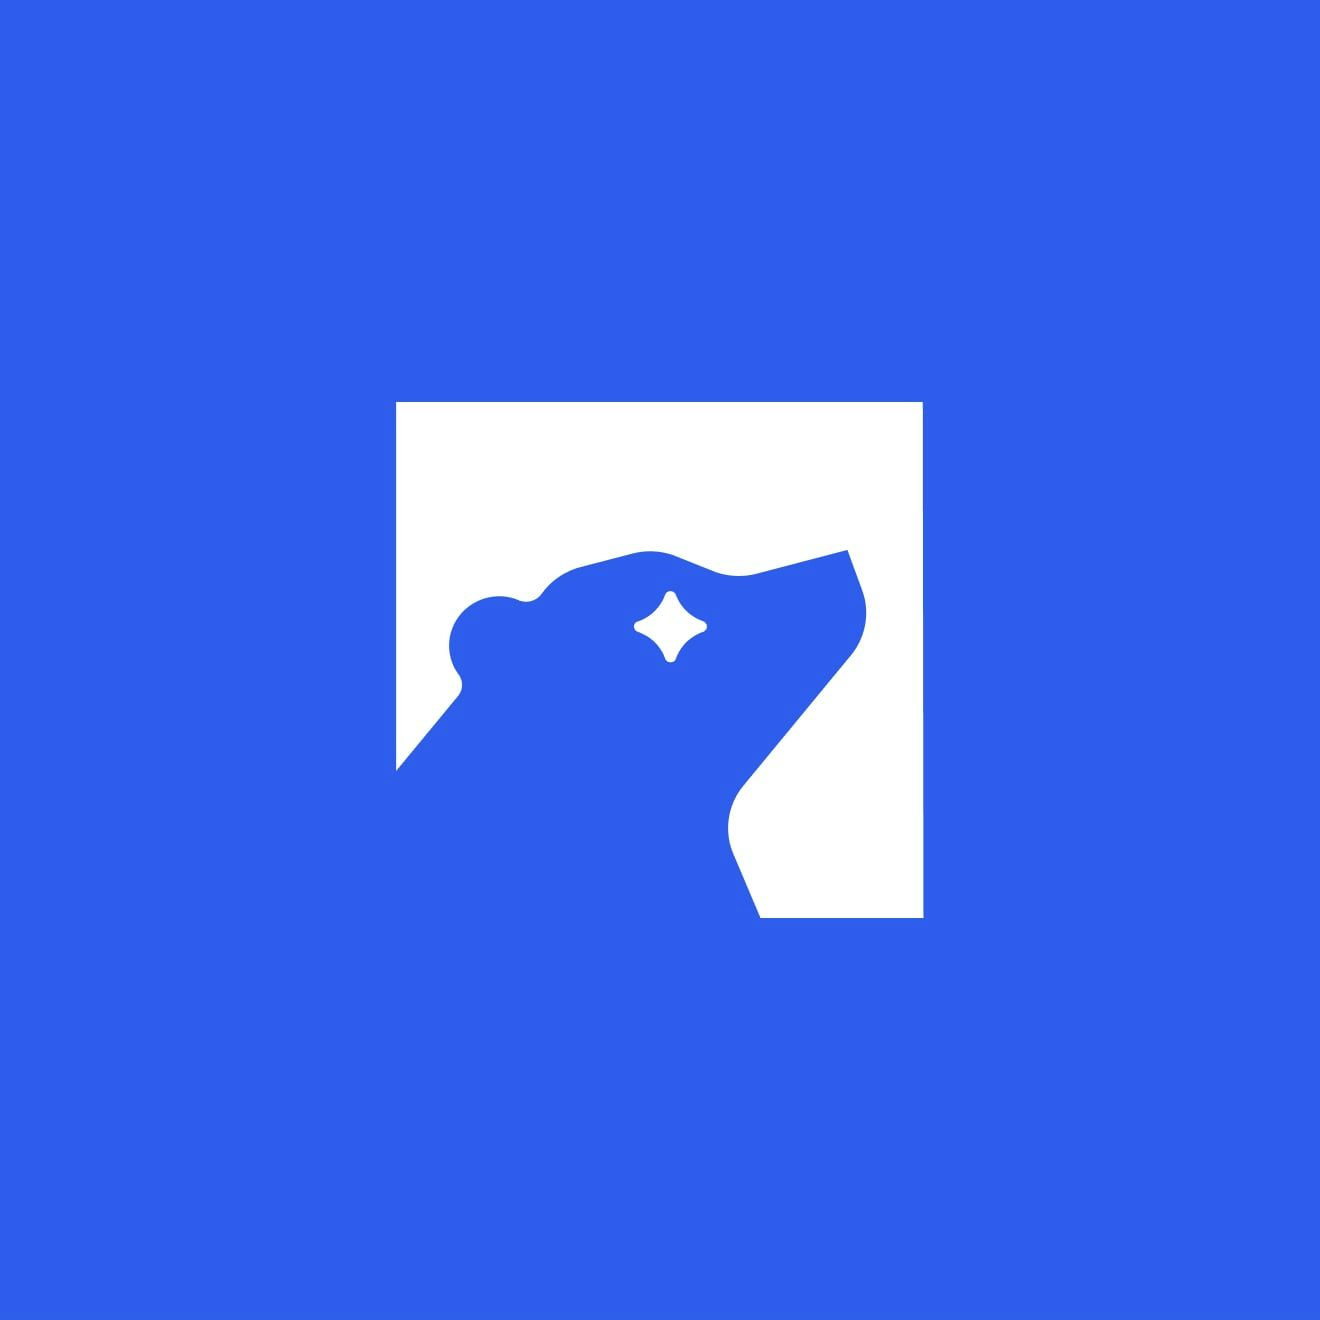 Little Bear labs icon with bear looking up at the sky